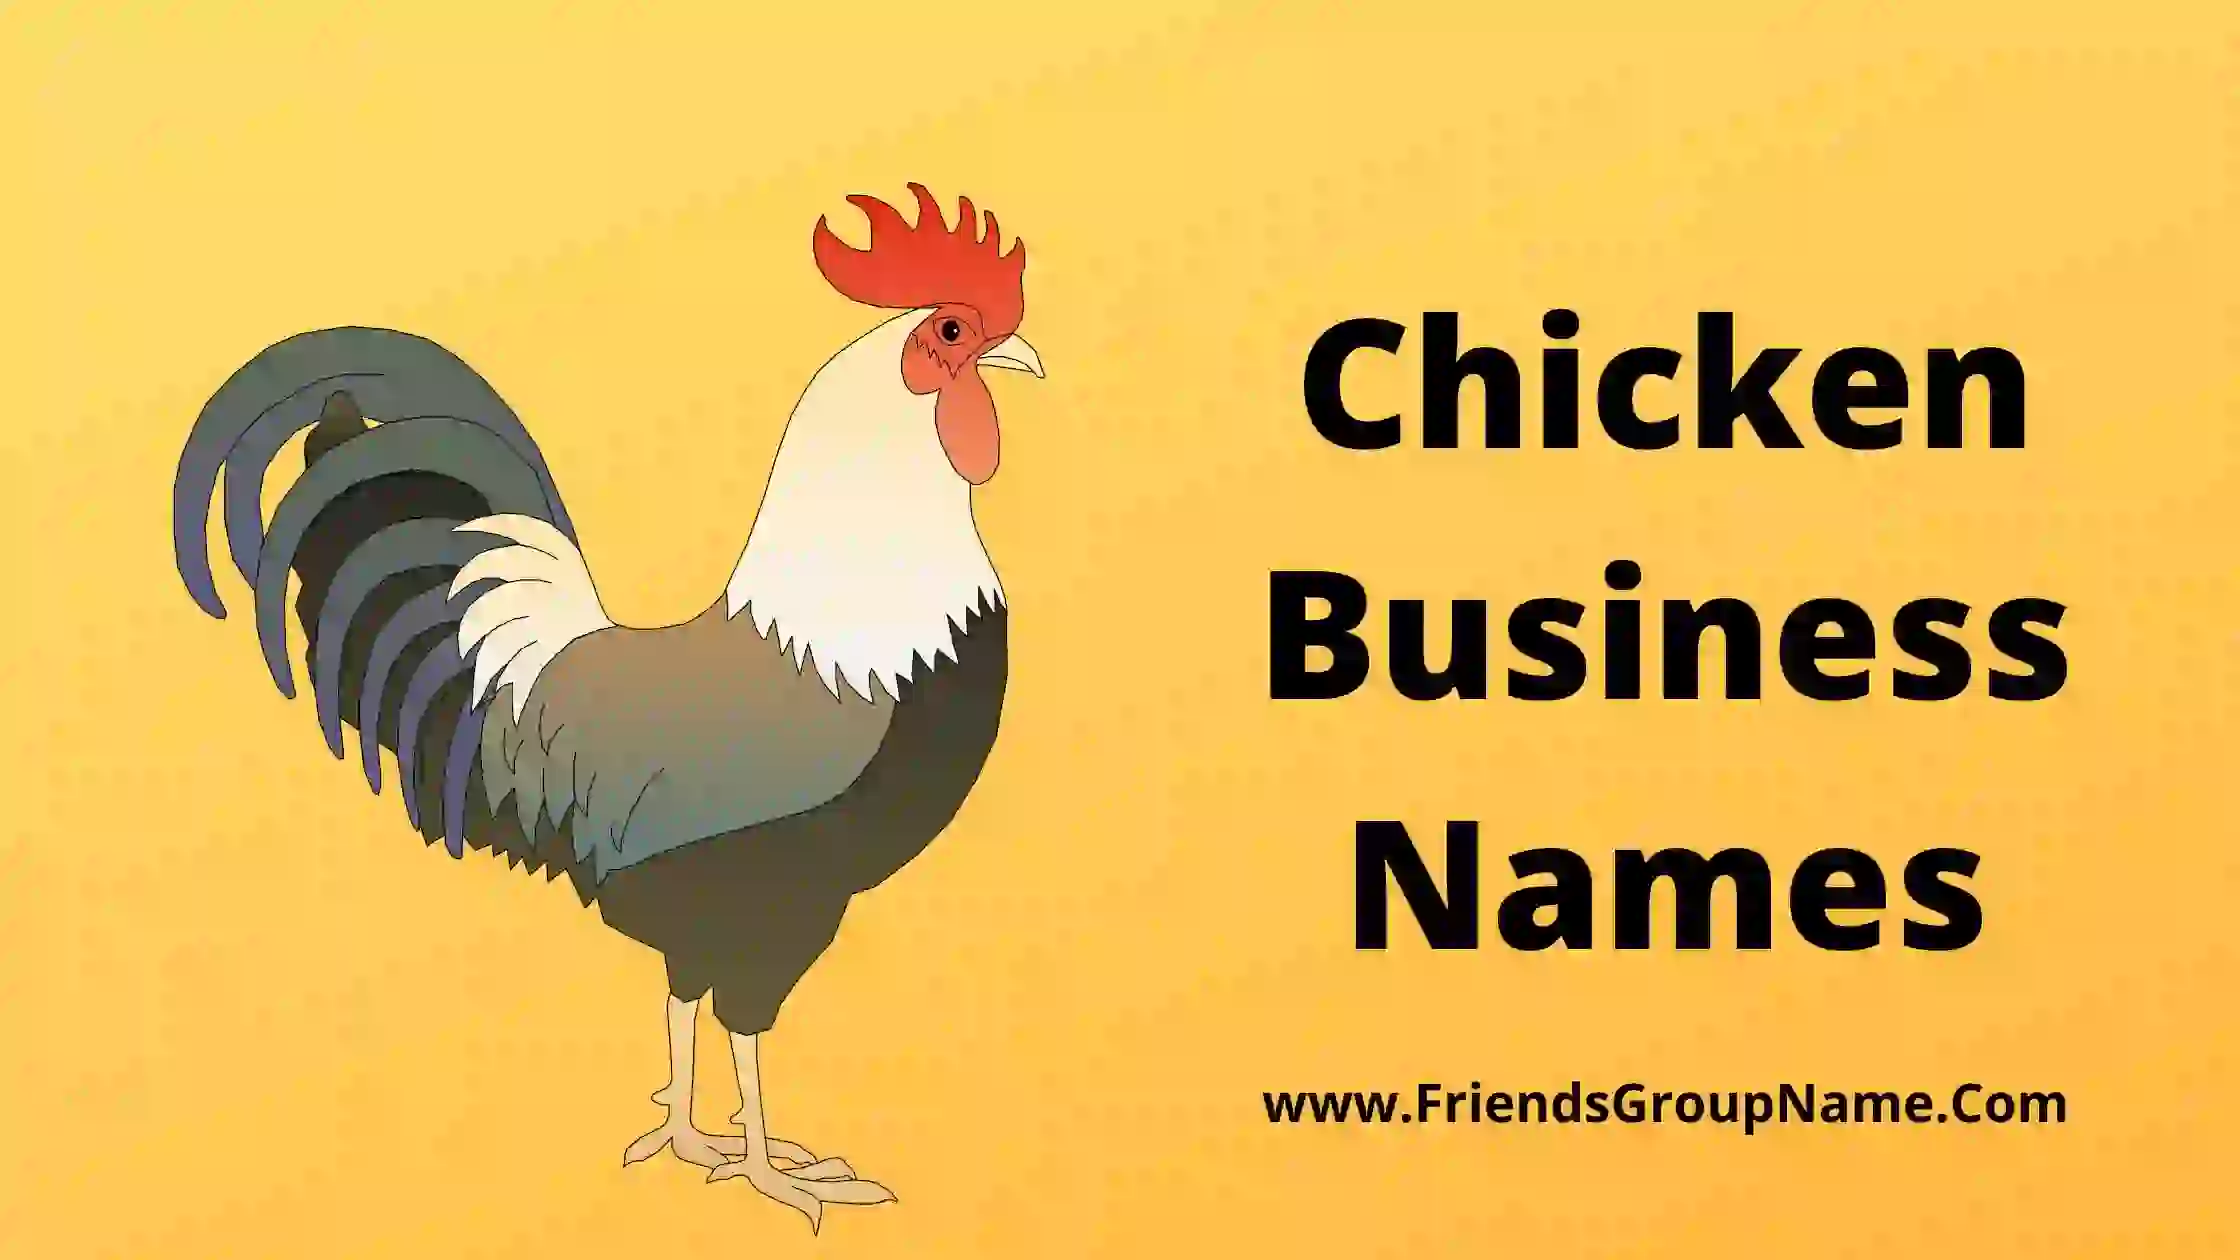 Chicken Business Names